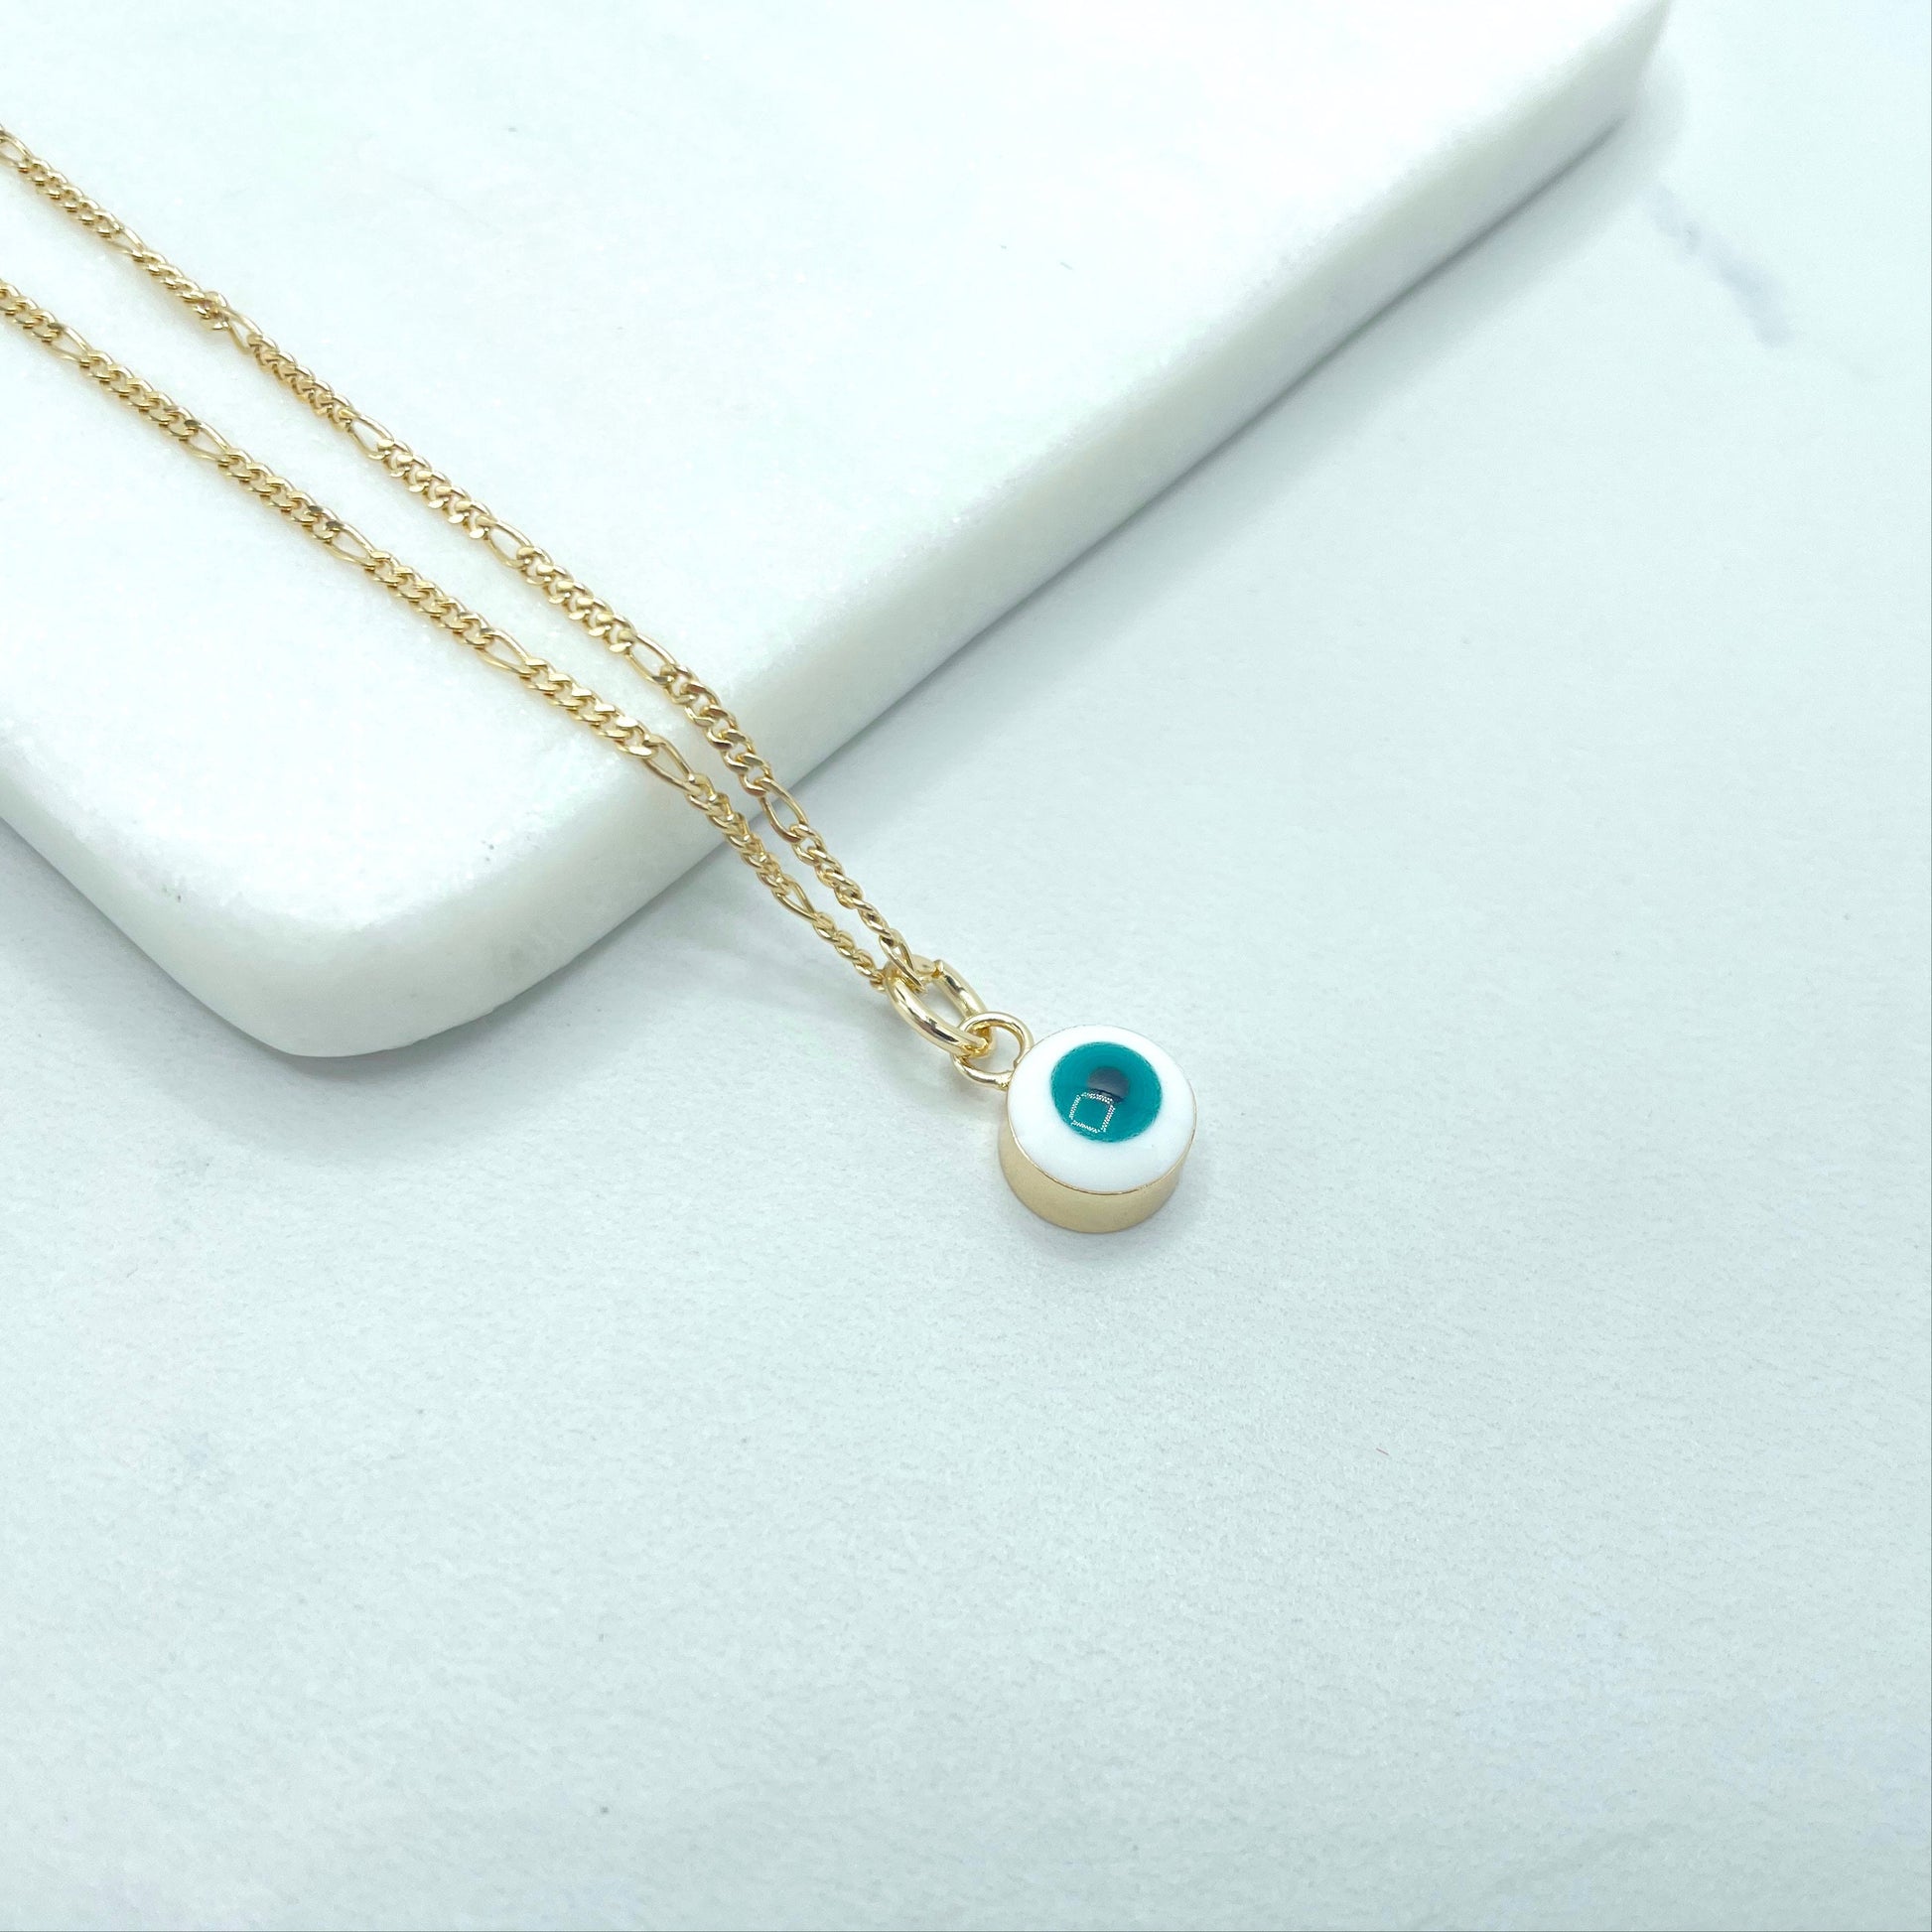 18k Gold Filled 1mm Figaro Link Dainty Chain, White & Teal Greek Evil Eyes Earrings or Charm, Small or Medium, Wholesale Jewelry Supplies